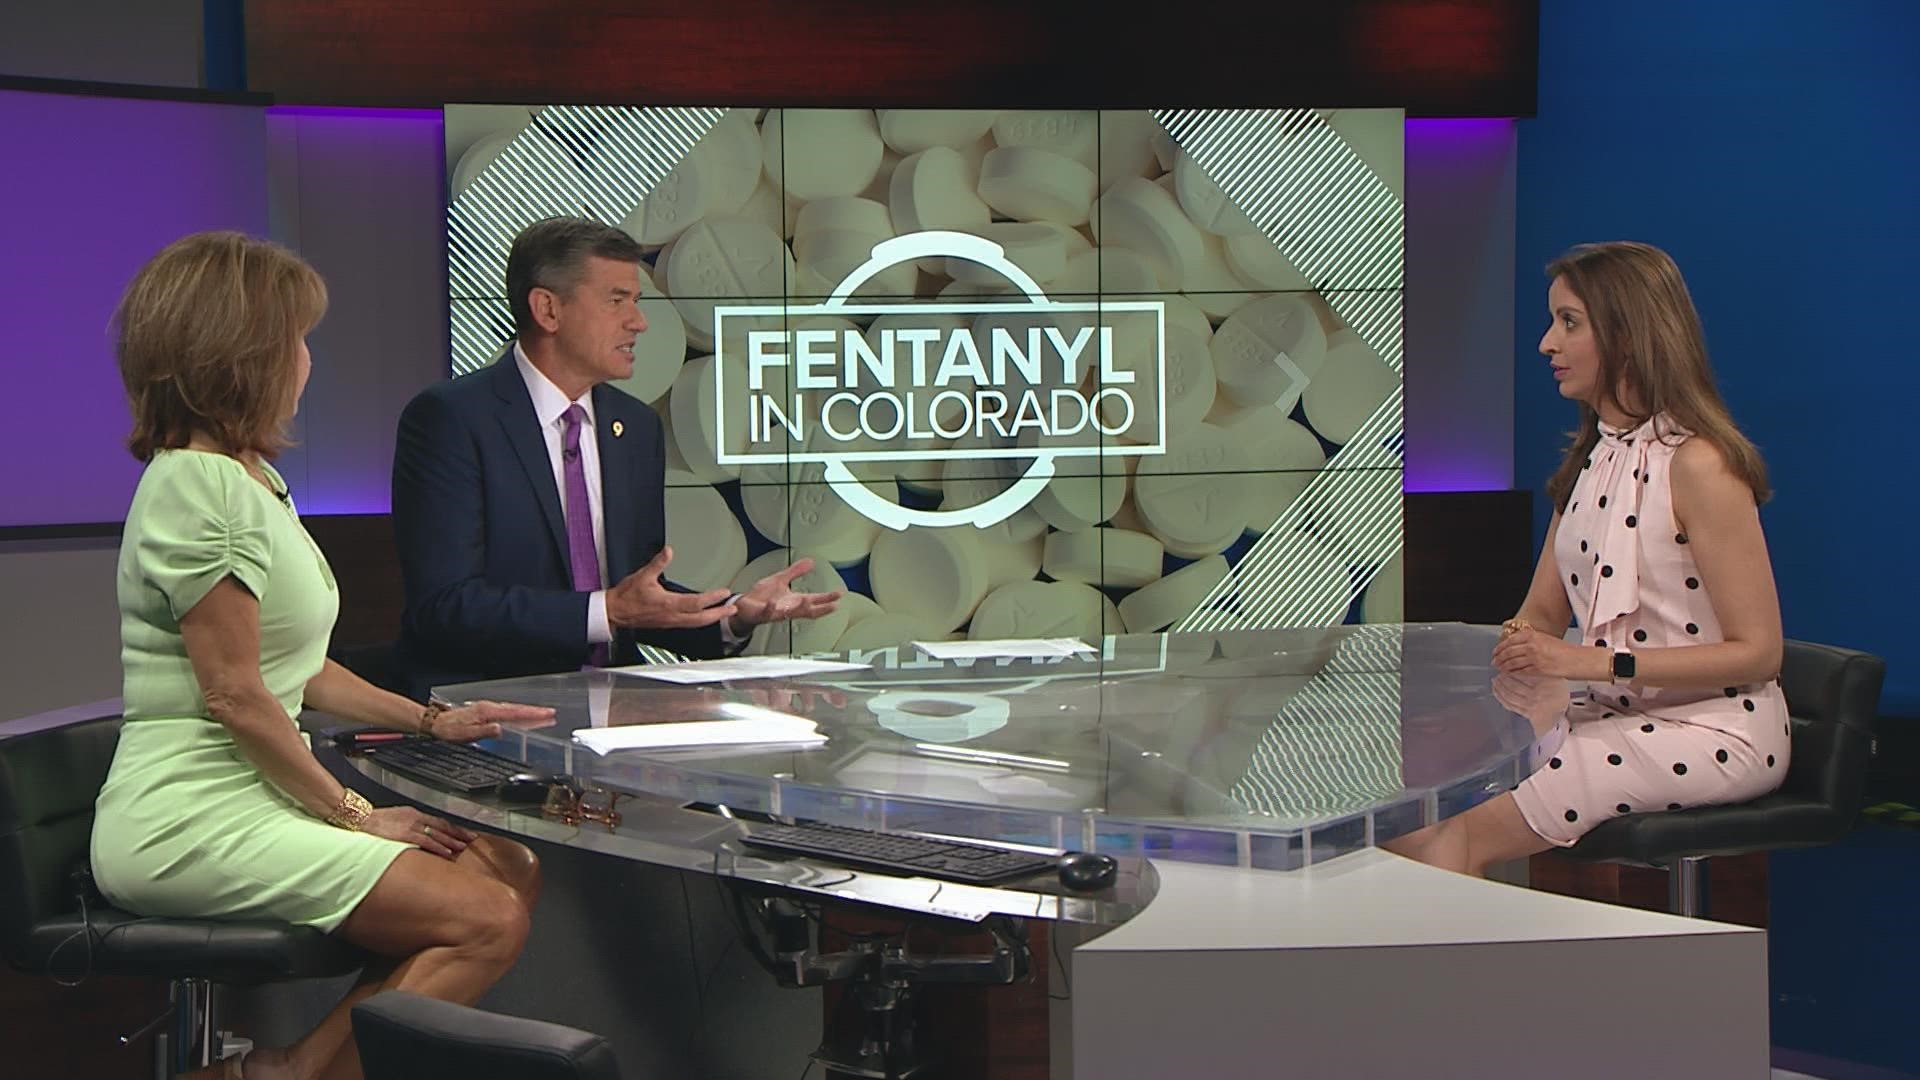 9Health Expert Dr. Payal Kohli discusses fentanyl's medical uses, why it's so deadly, what to know about overdoses, and how to talk to kids about the drug.